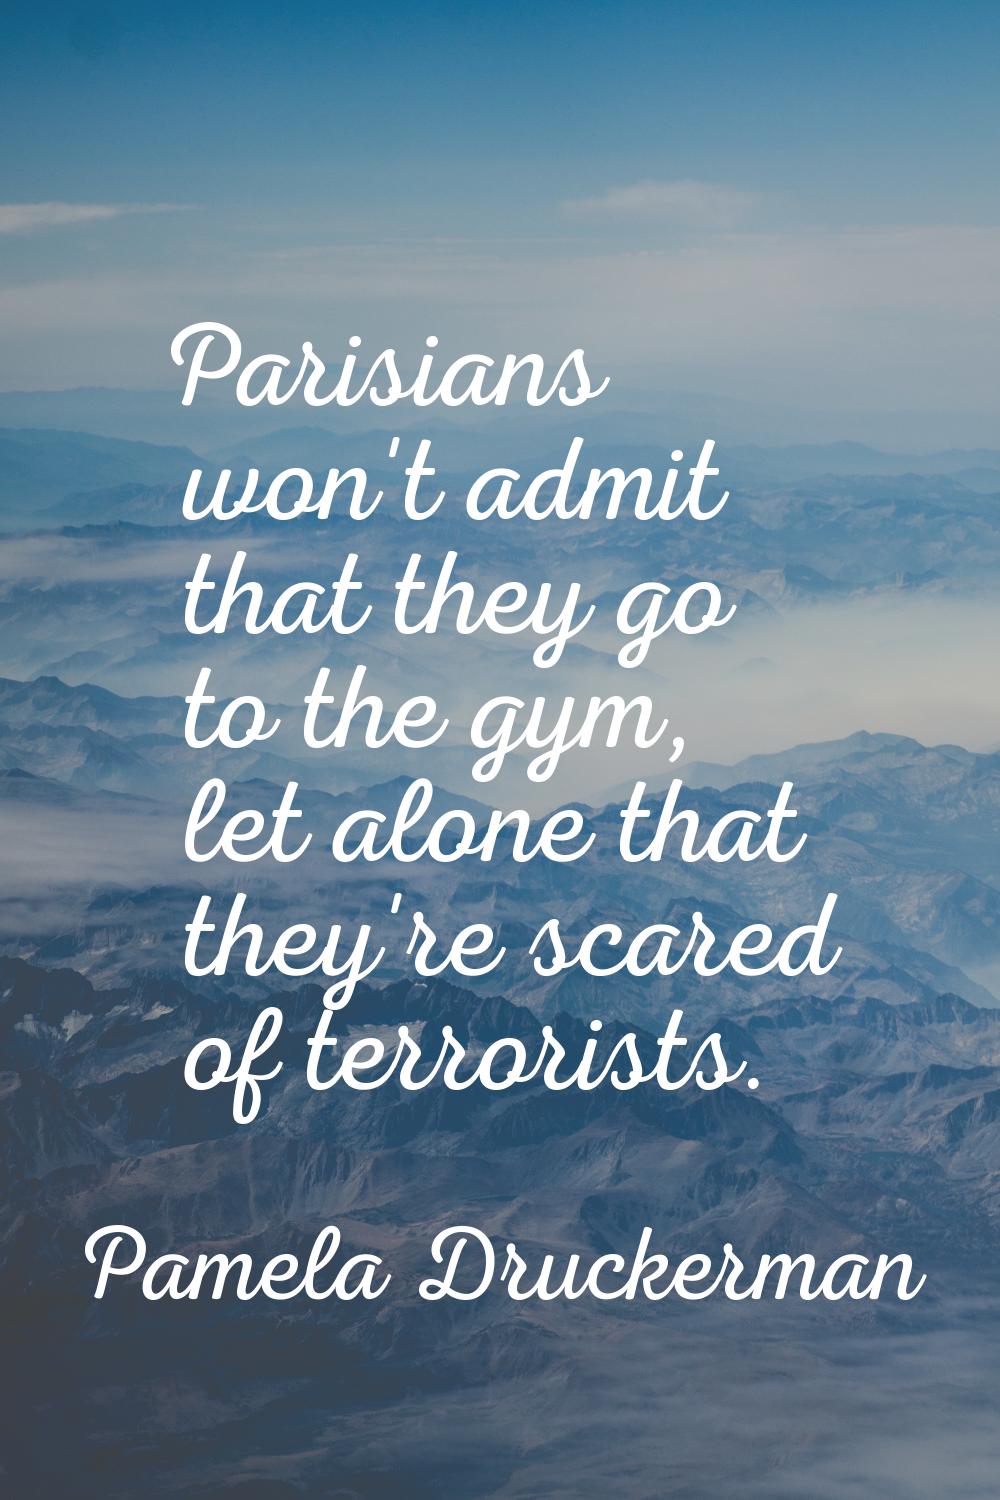 Parisians won't admit that they go to the gym, let alone that they're scared of terrorists.